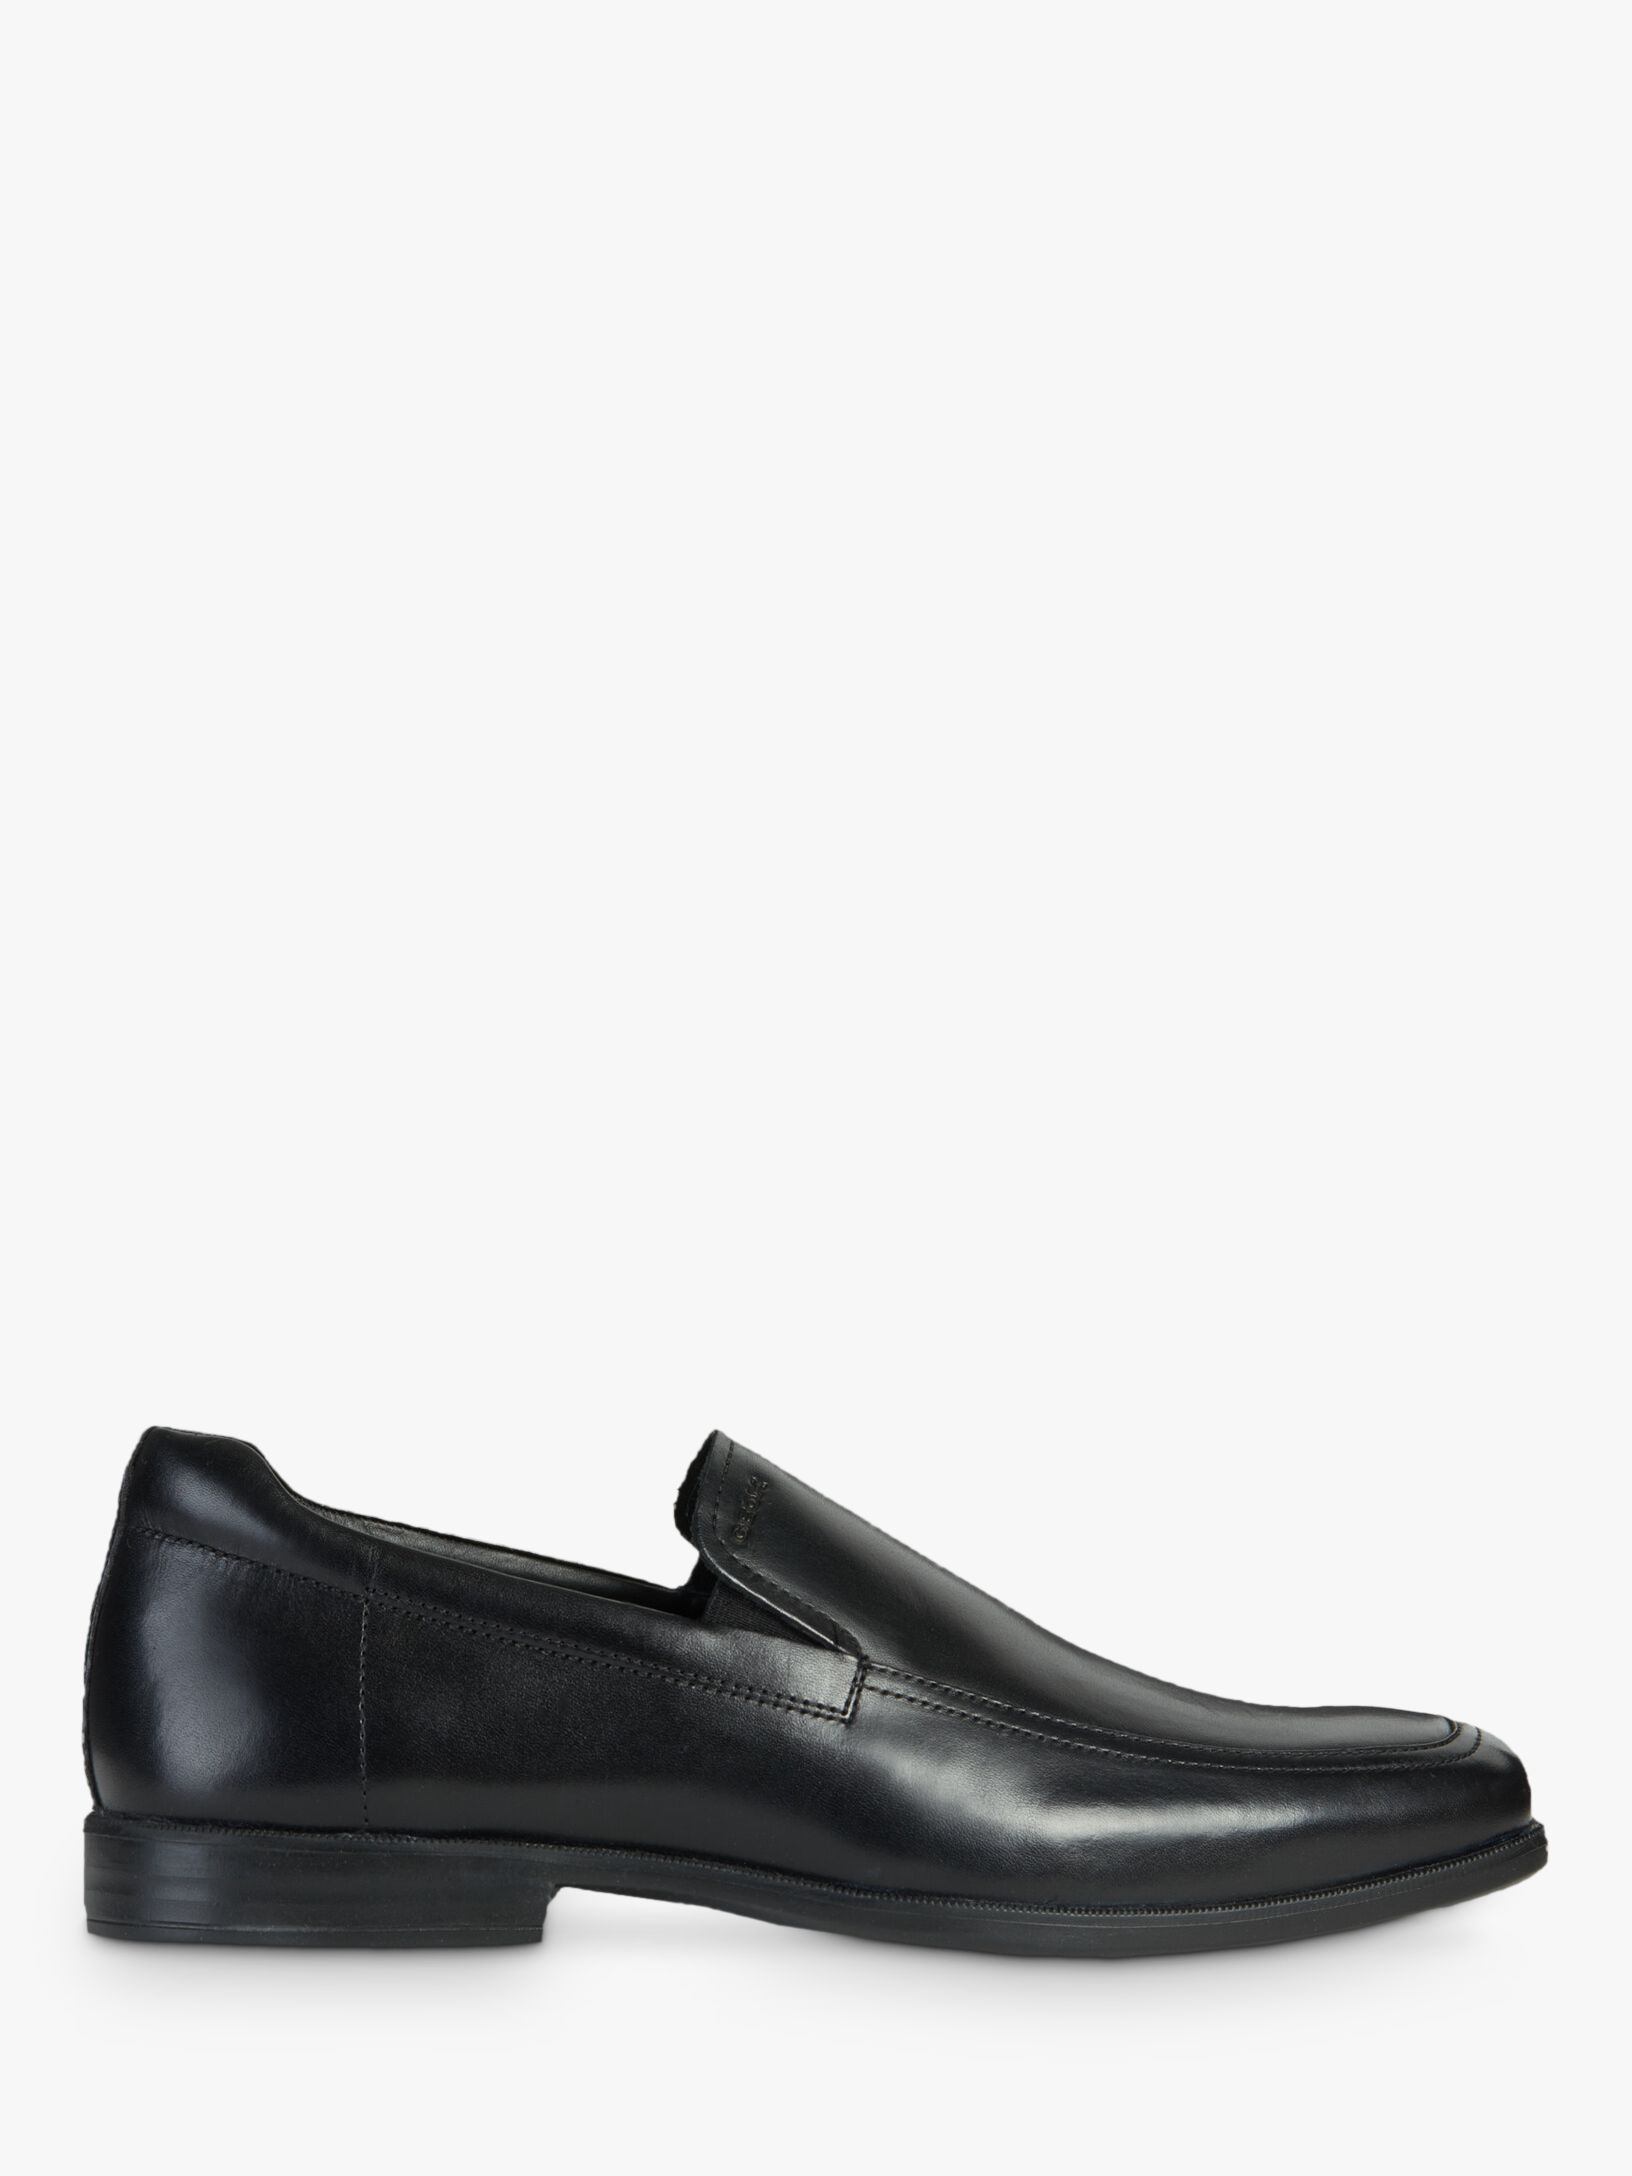 Geox Calgary Leather Loafers, Black at John Lewis & Partners